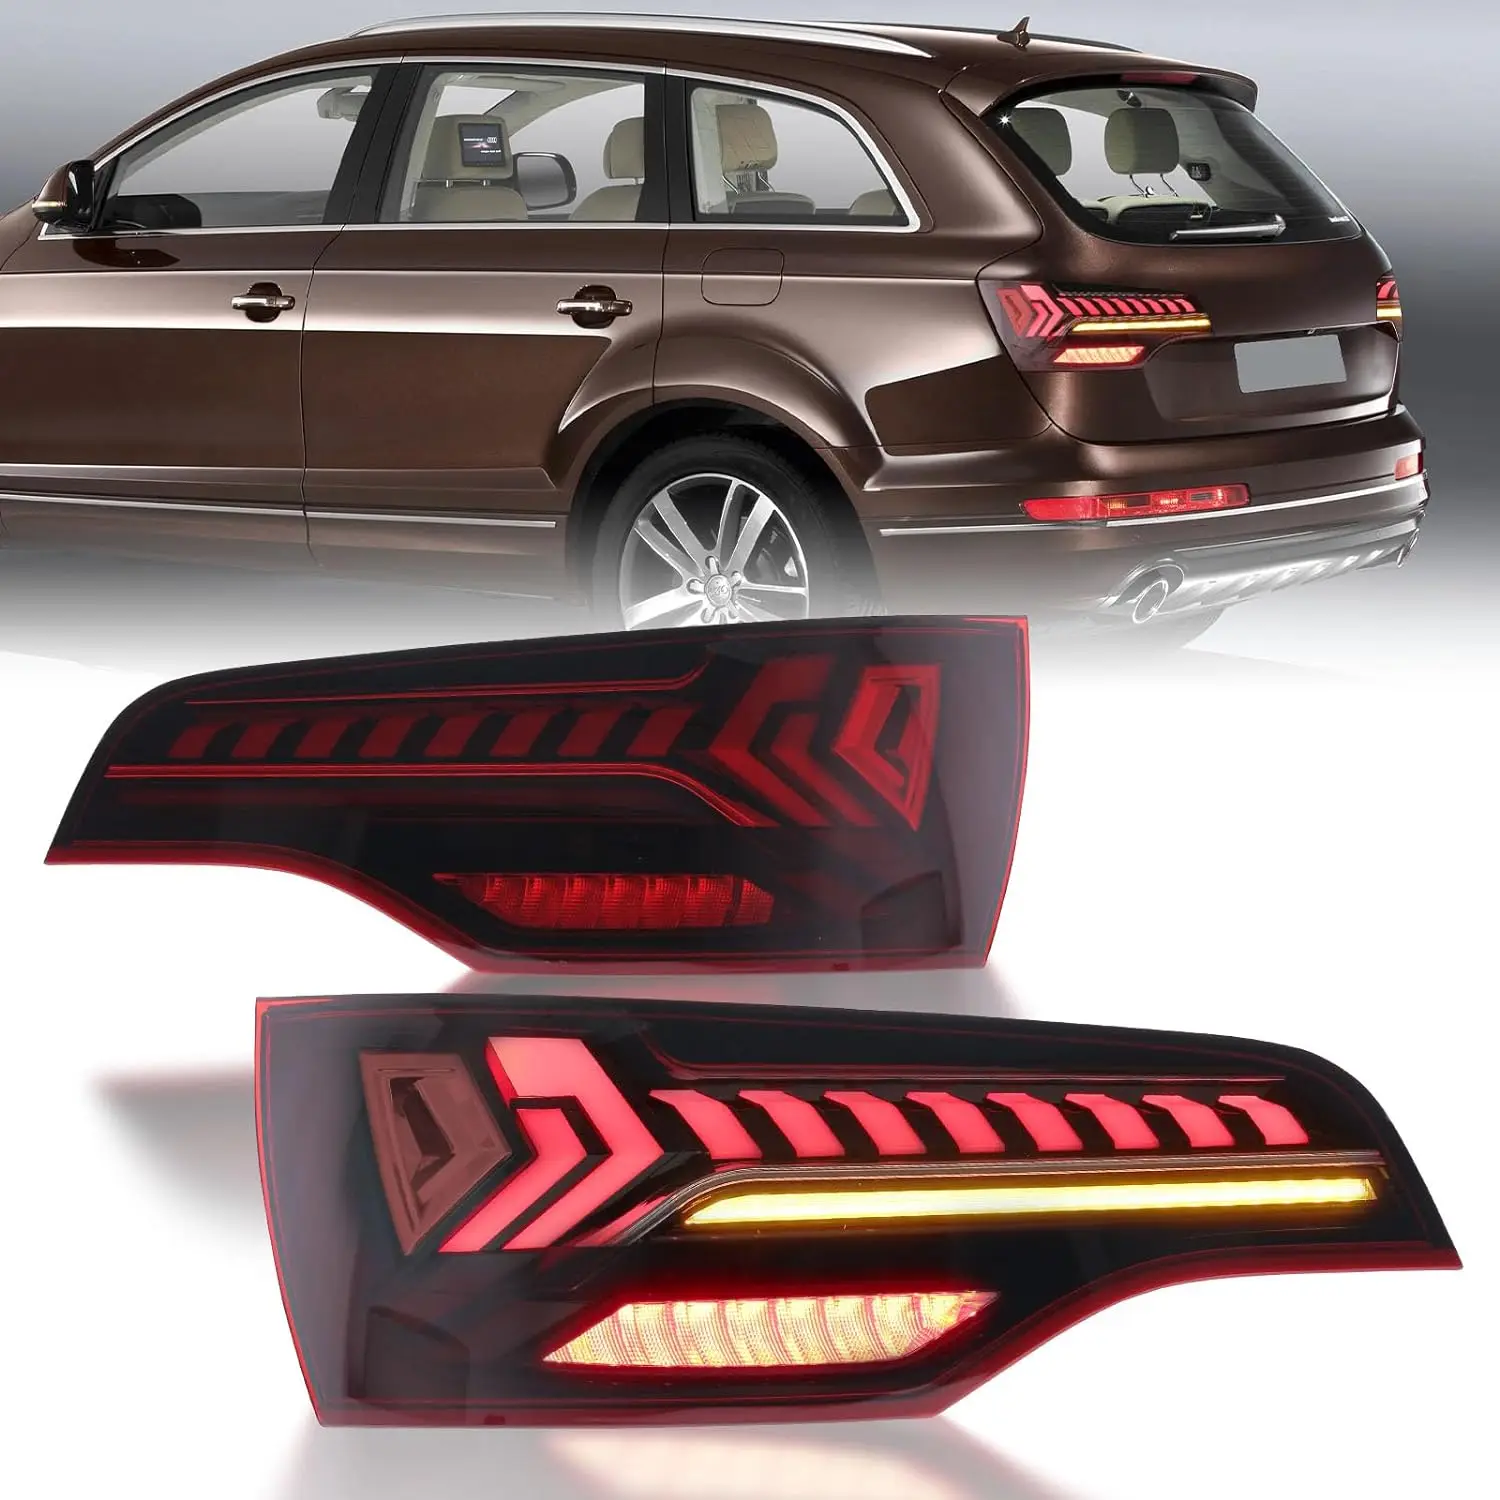 

LED Tail Lights for Audi Q7 2006-2015 Upgrade Rear Light with 3D Dynamic Animation Sequential Indicator